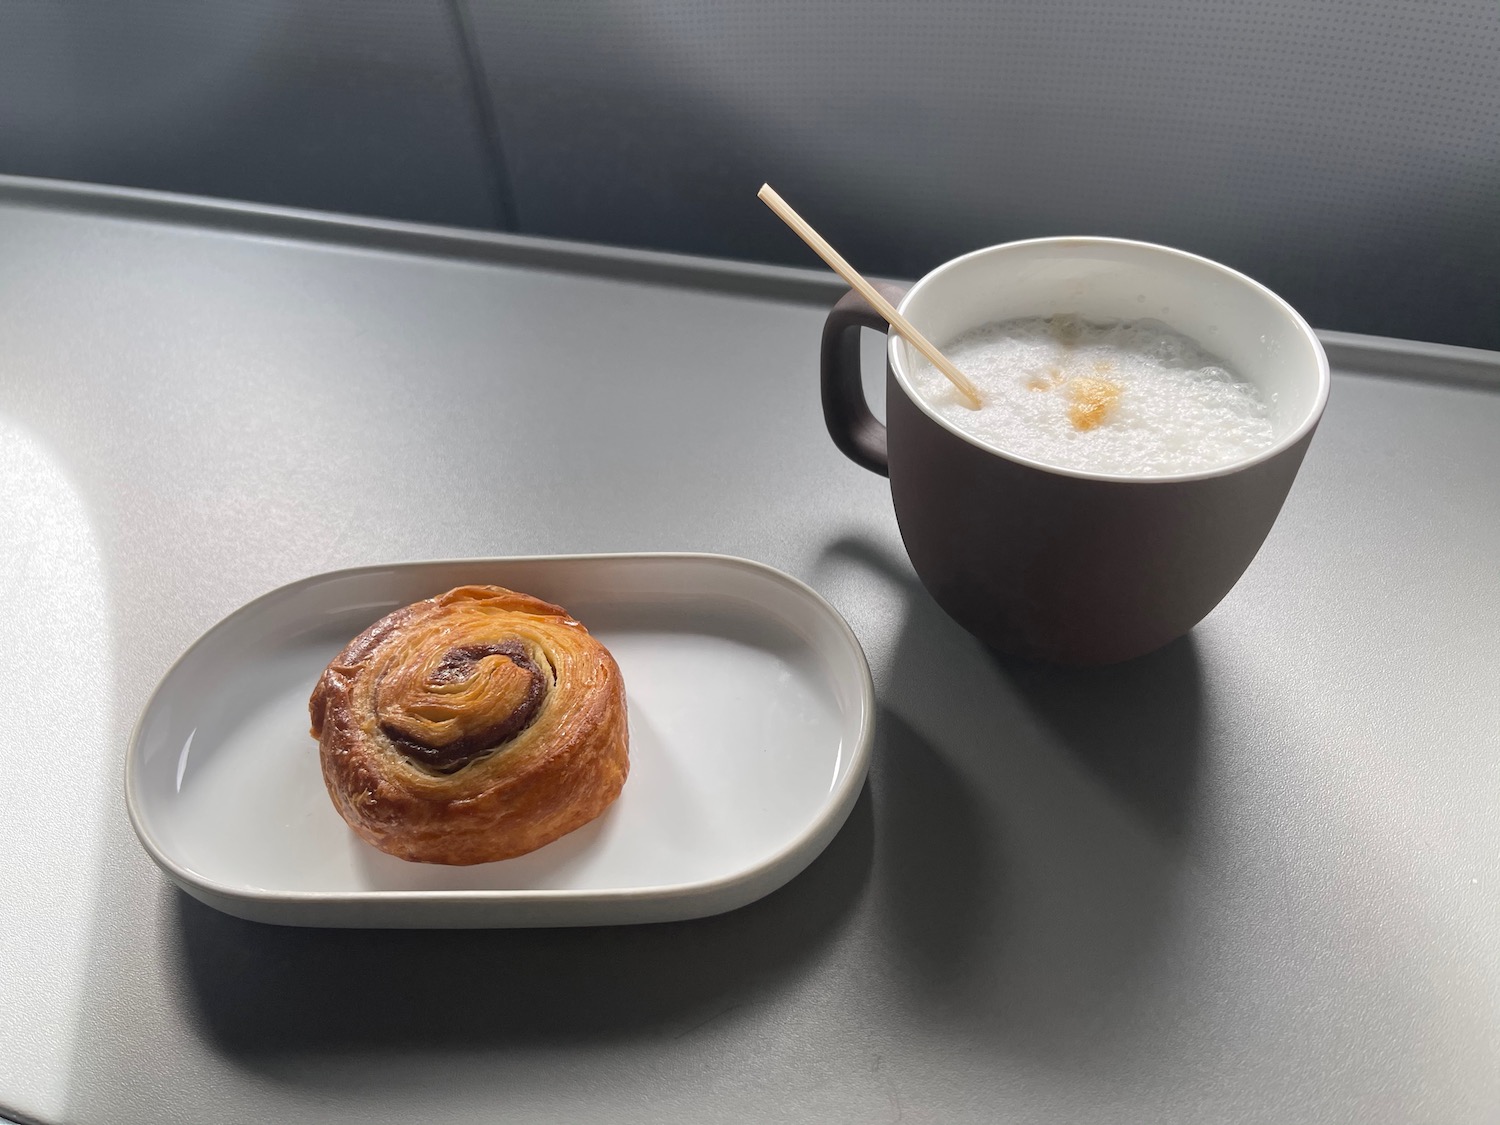 a pastry on a plate next to a cup of coffee